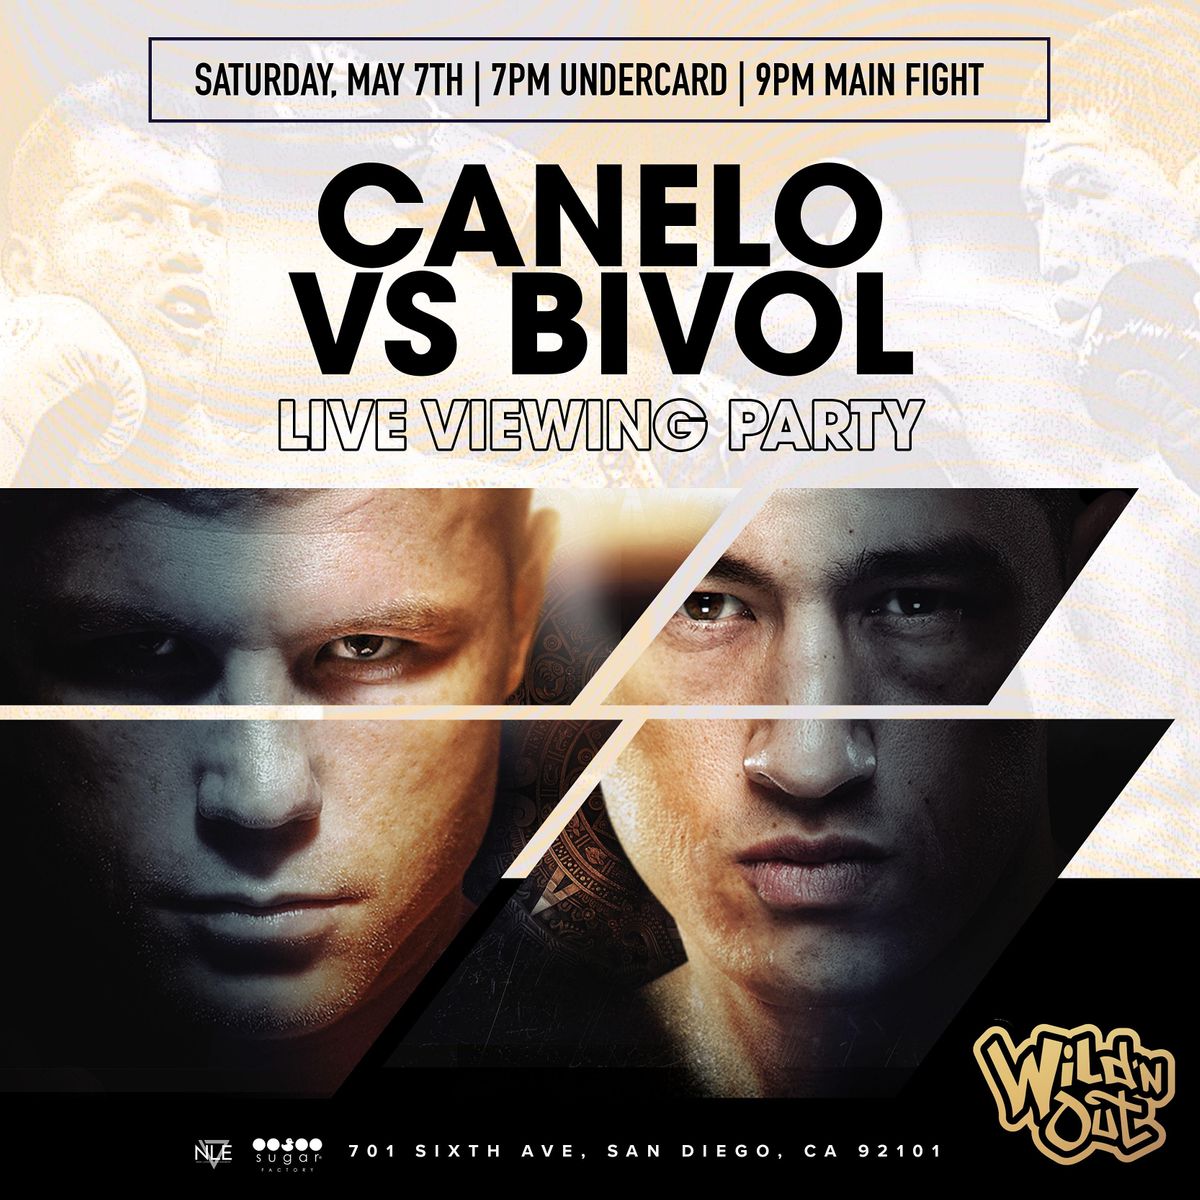 CANELO Vs BIVOL Complimentary Viewing Party Tickets